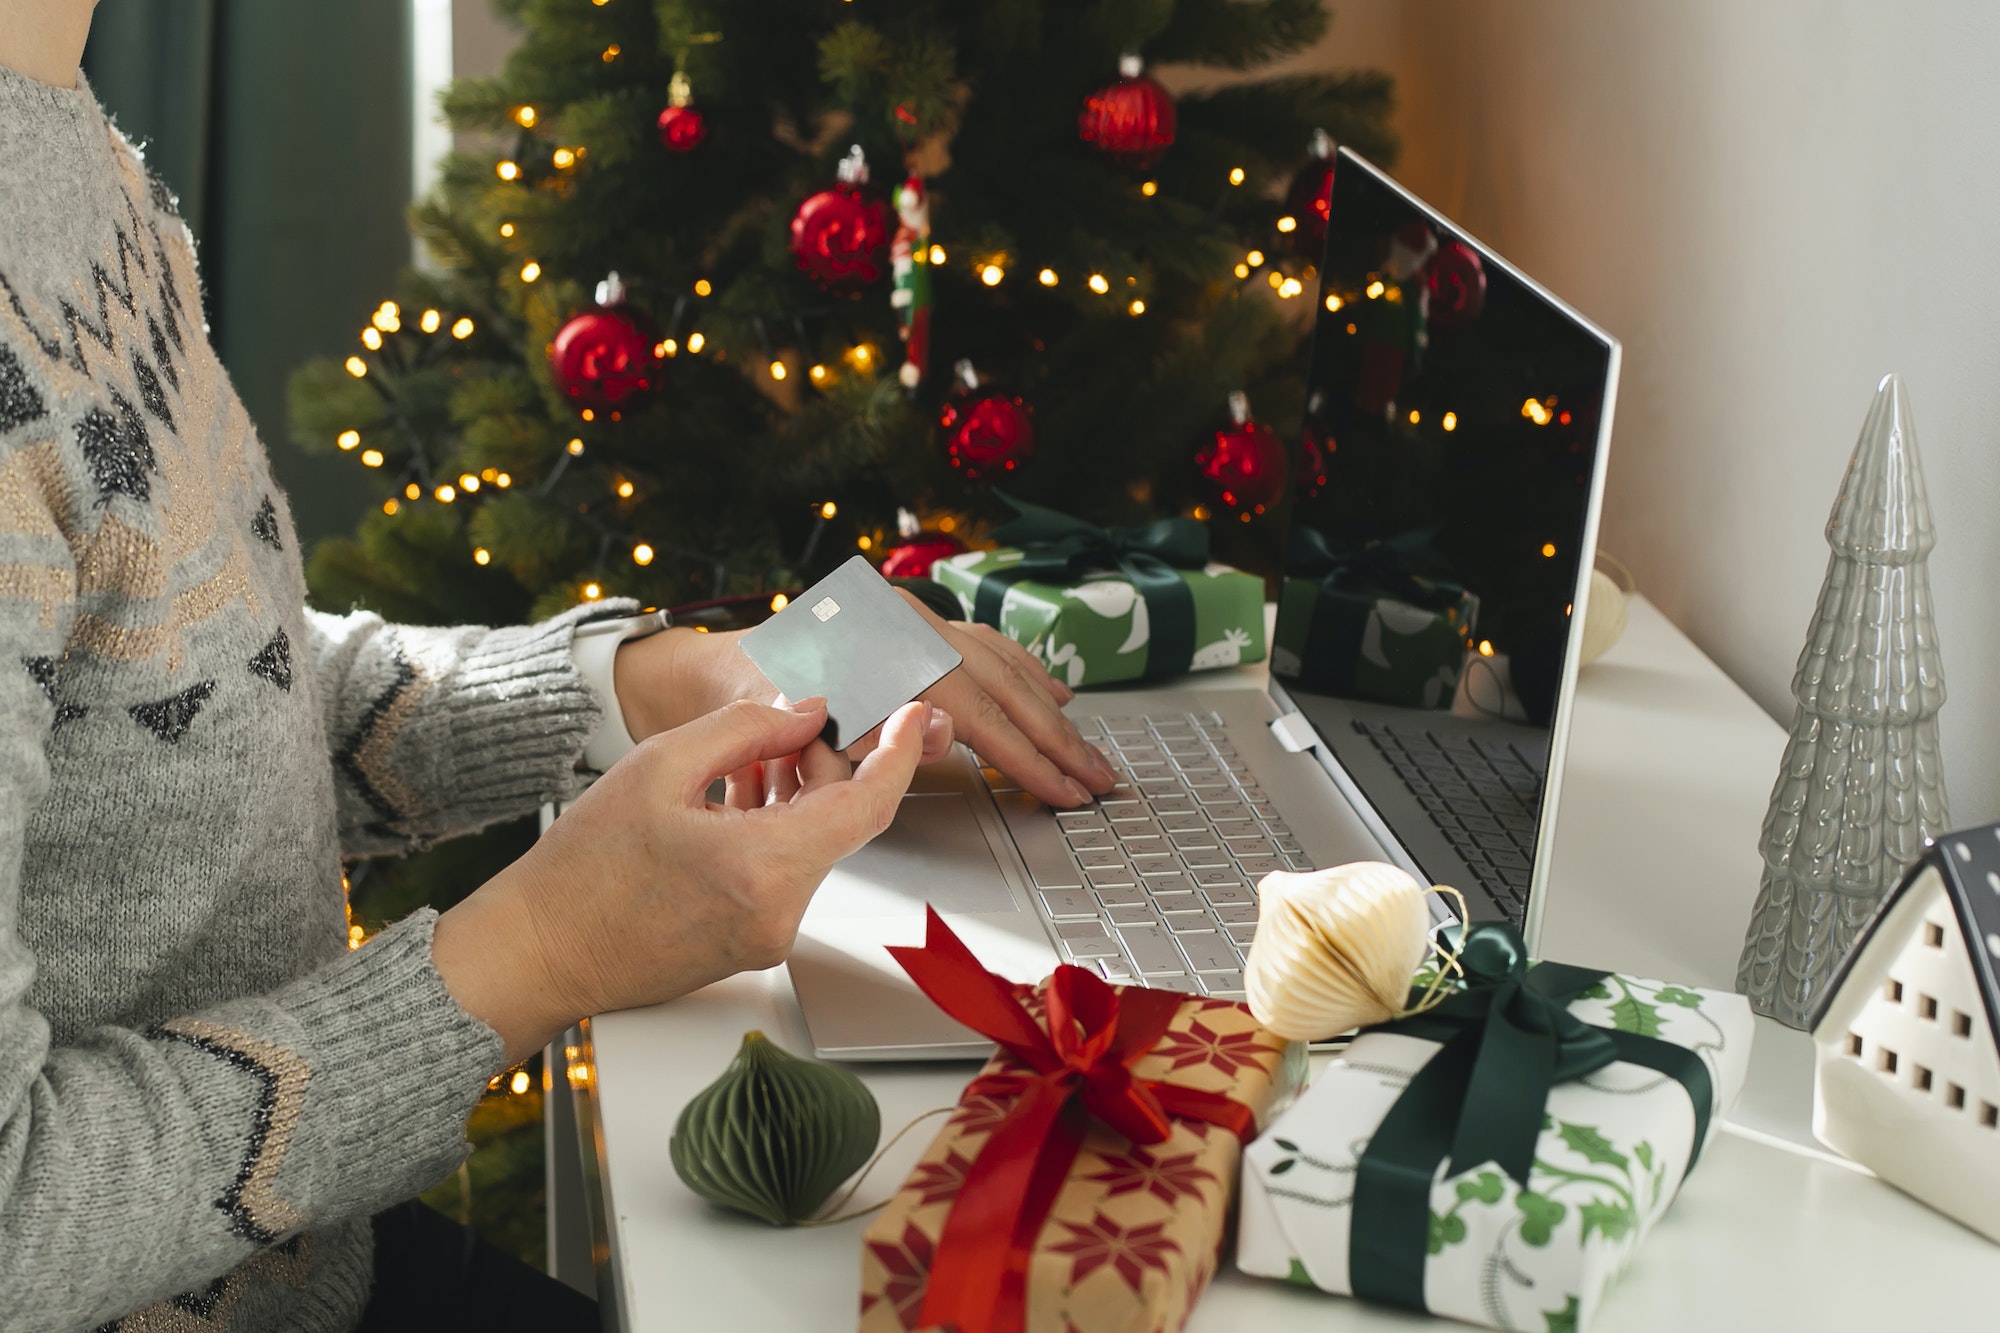 Shop Cyber Safe This Holiday Season